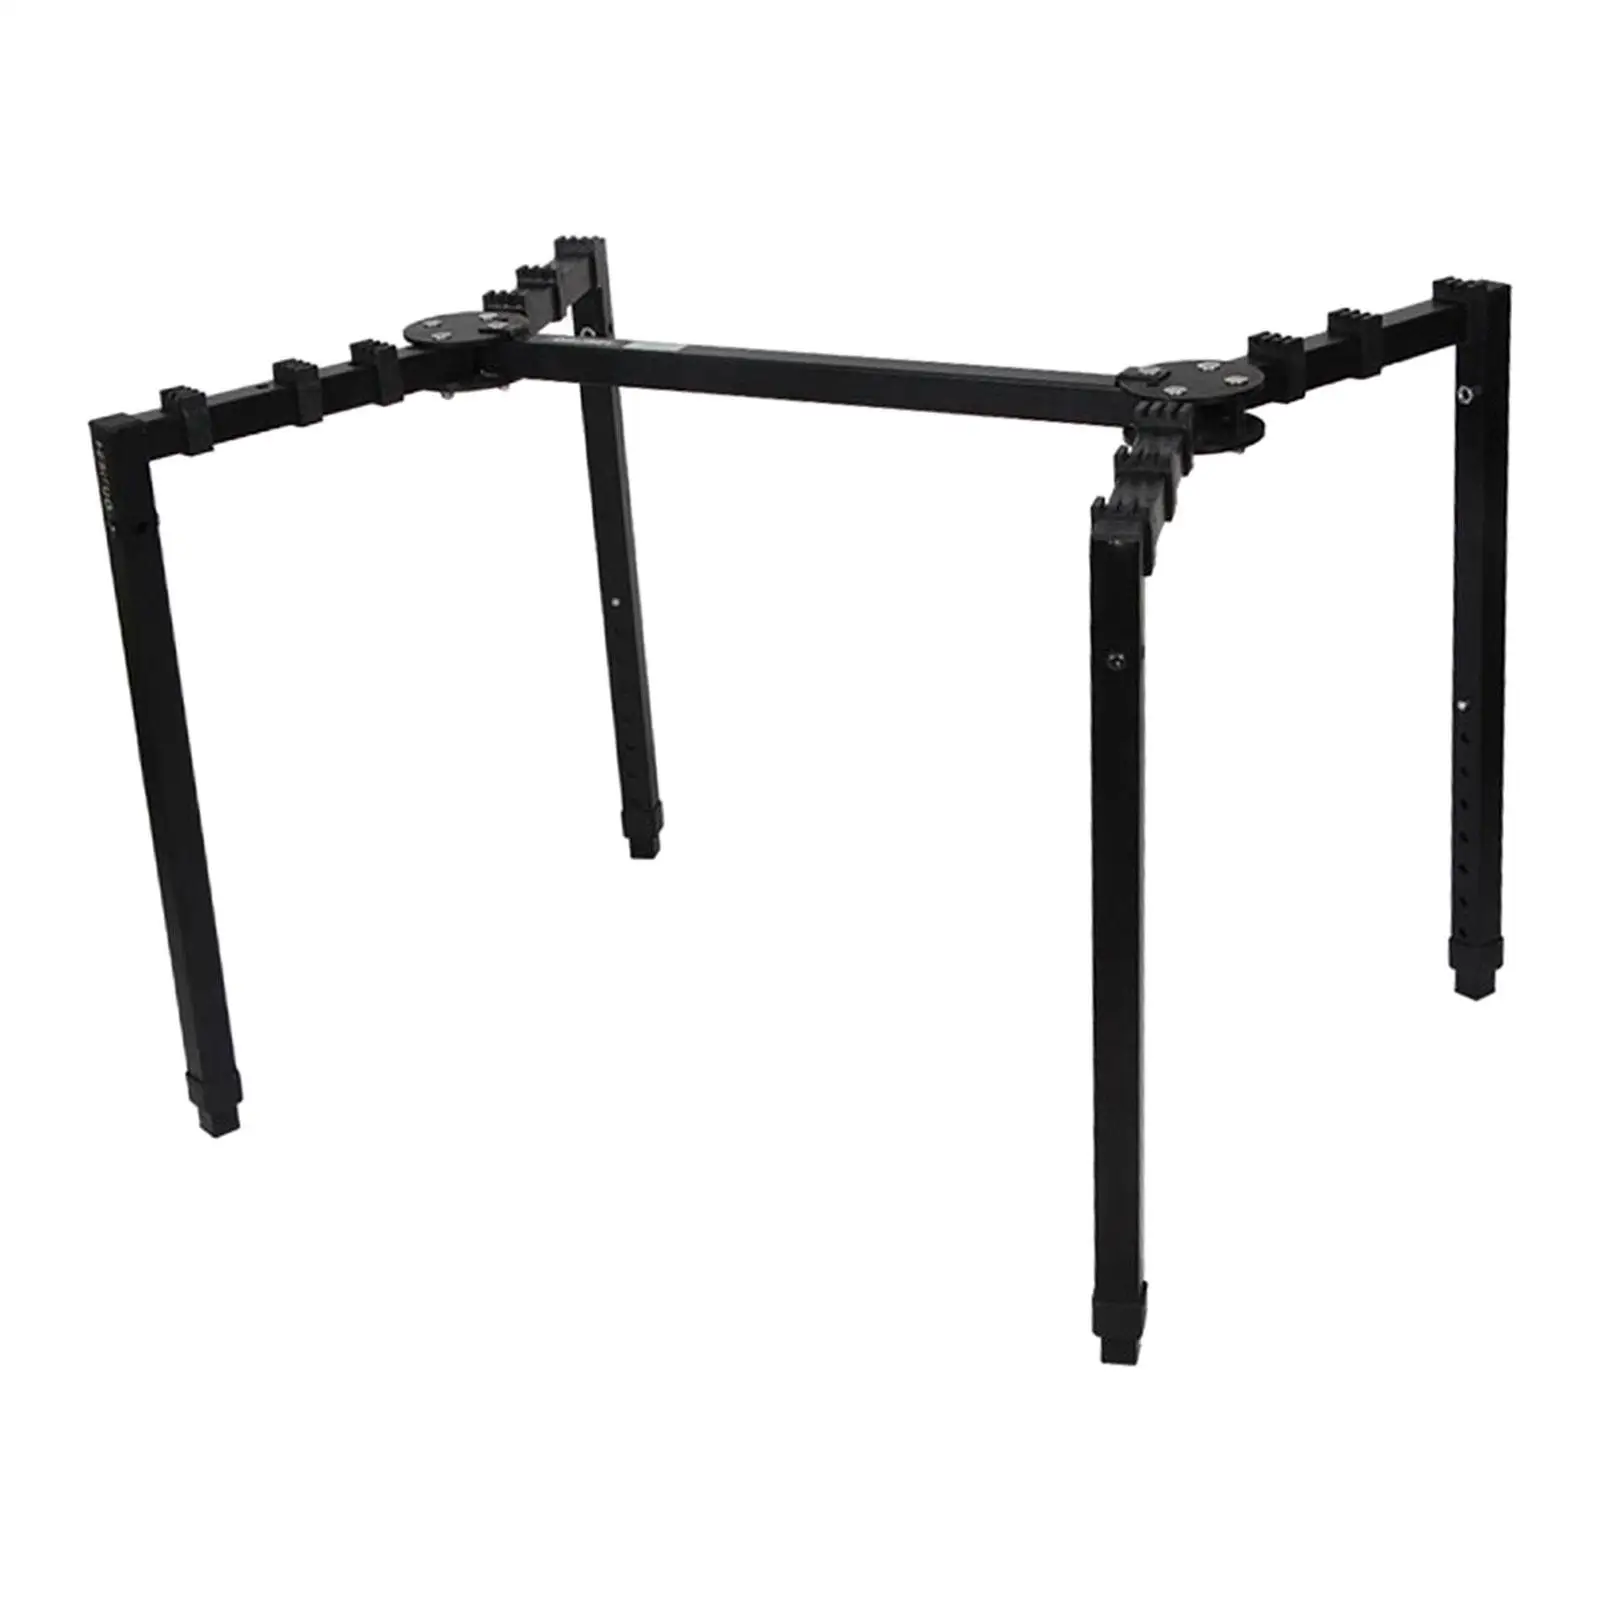 Folding Electronic Keyboard Piano Stand Musical Instrument Parts Desk Keyboard Lifter Electronic Organ Stand for Stage Beginners